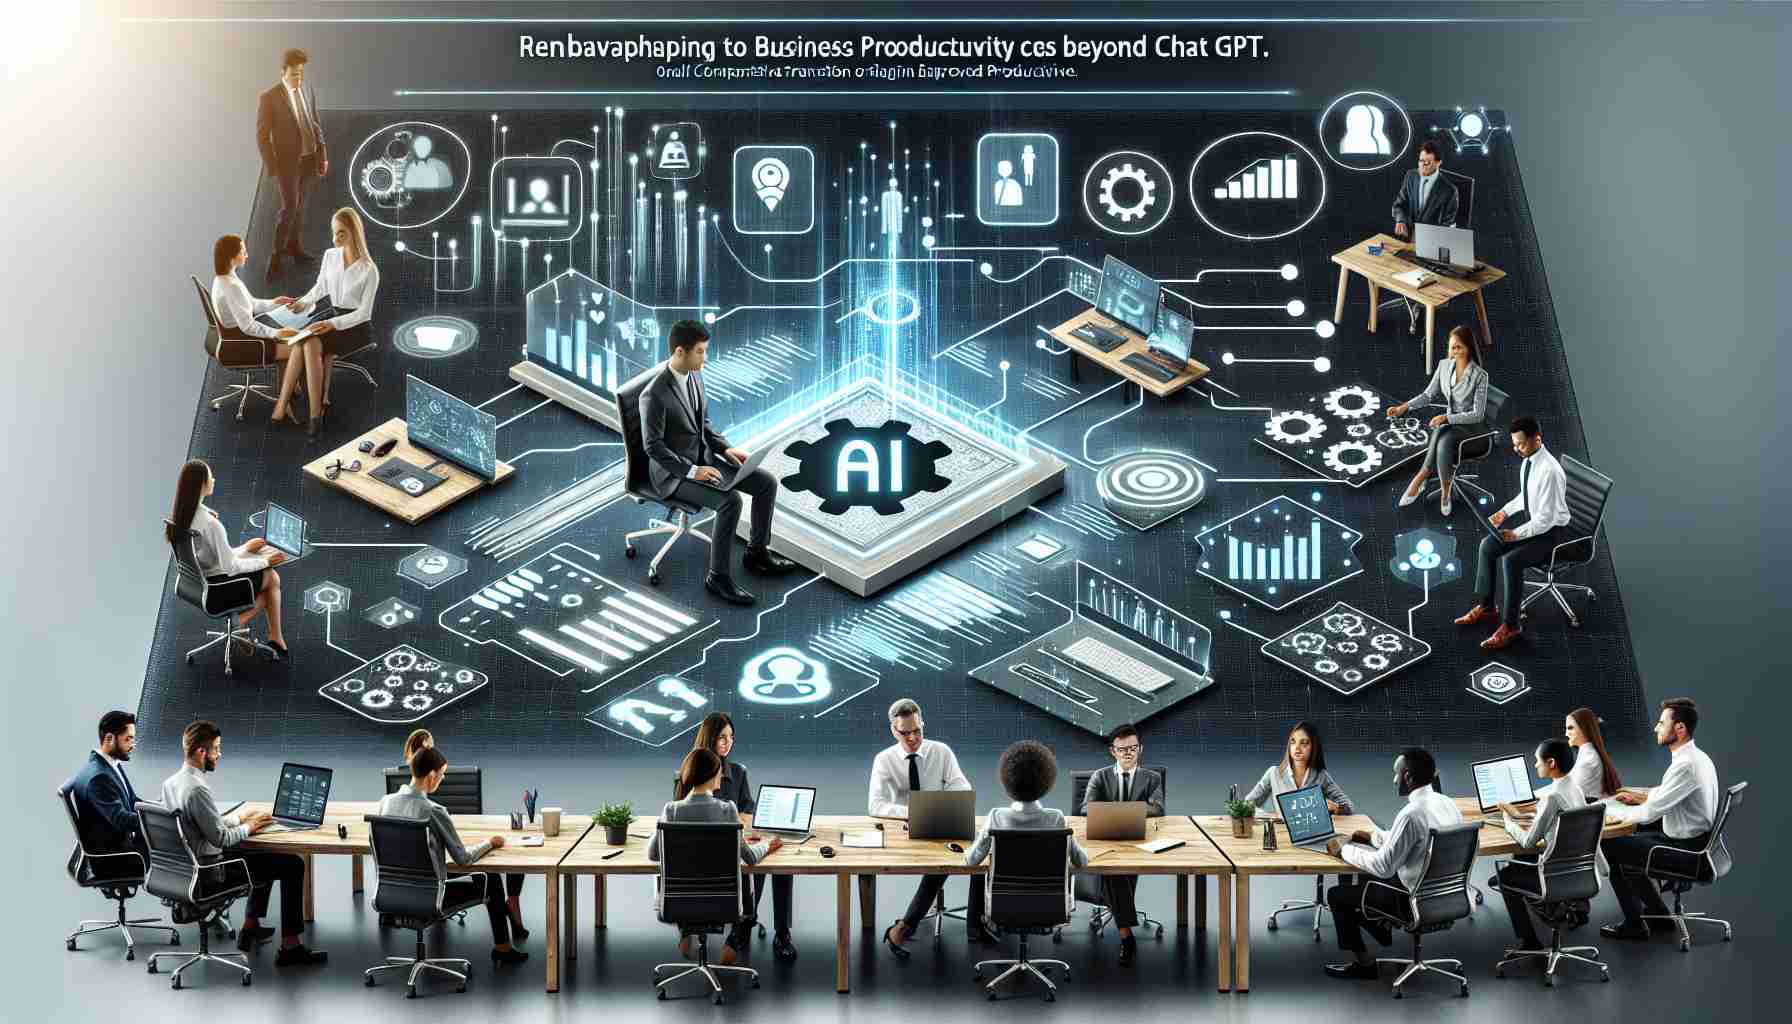 Revamping Business Productivity with AI Tools Beyond ChatGPT